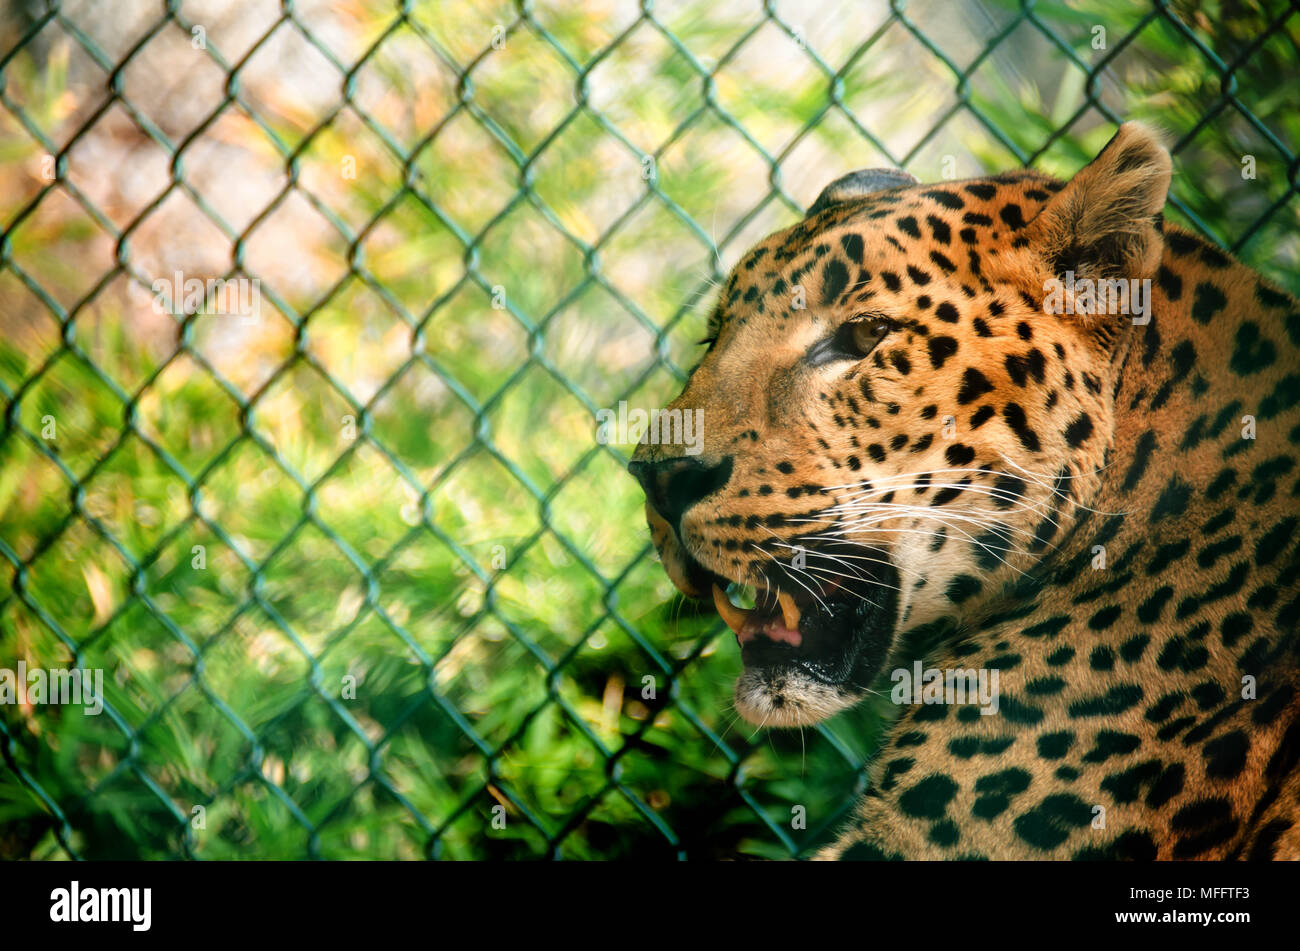 Endangered felid close up with a fence on the background Stock Photo